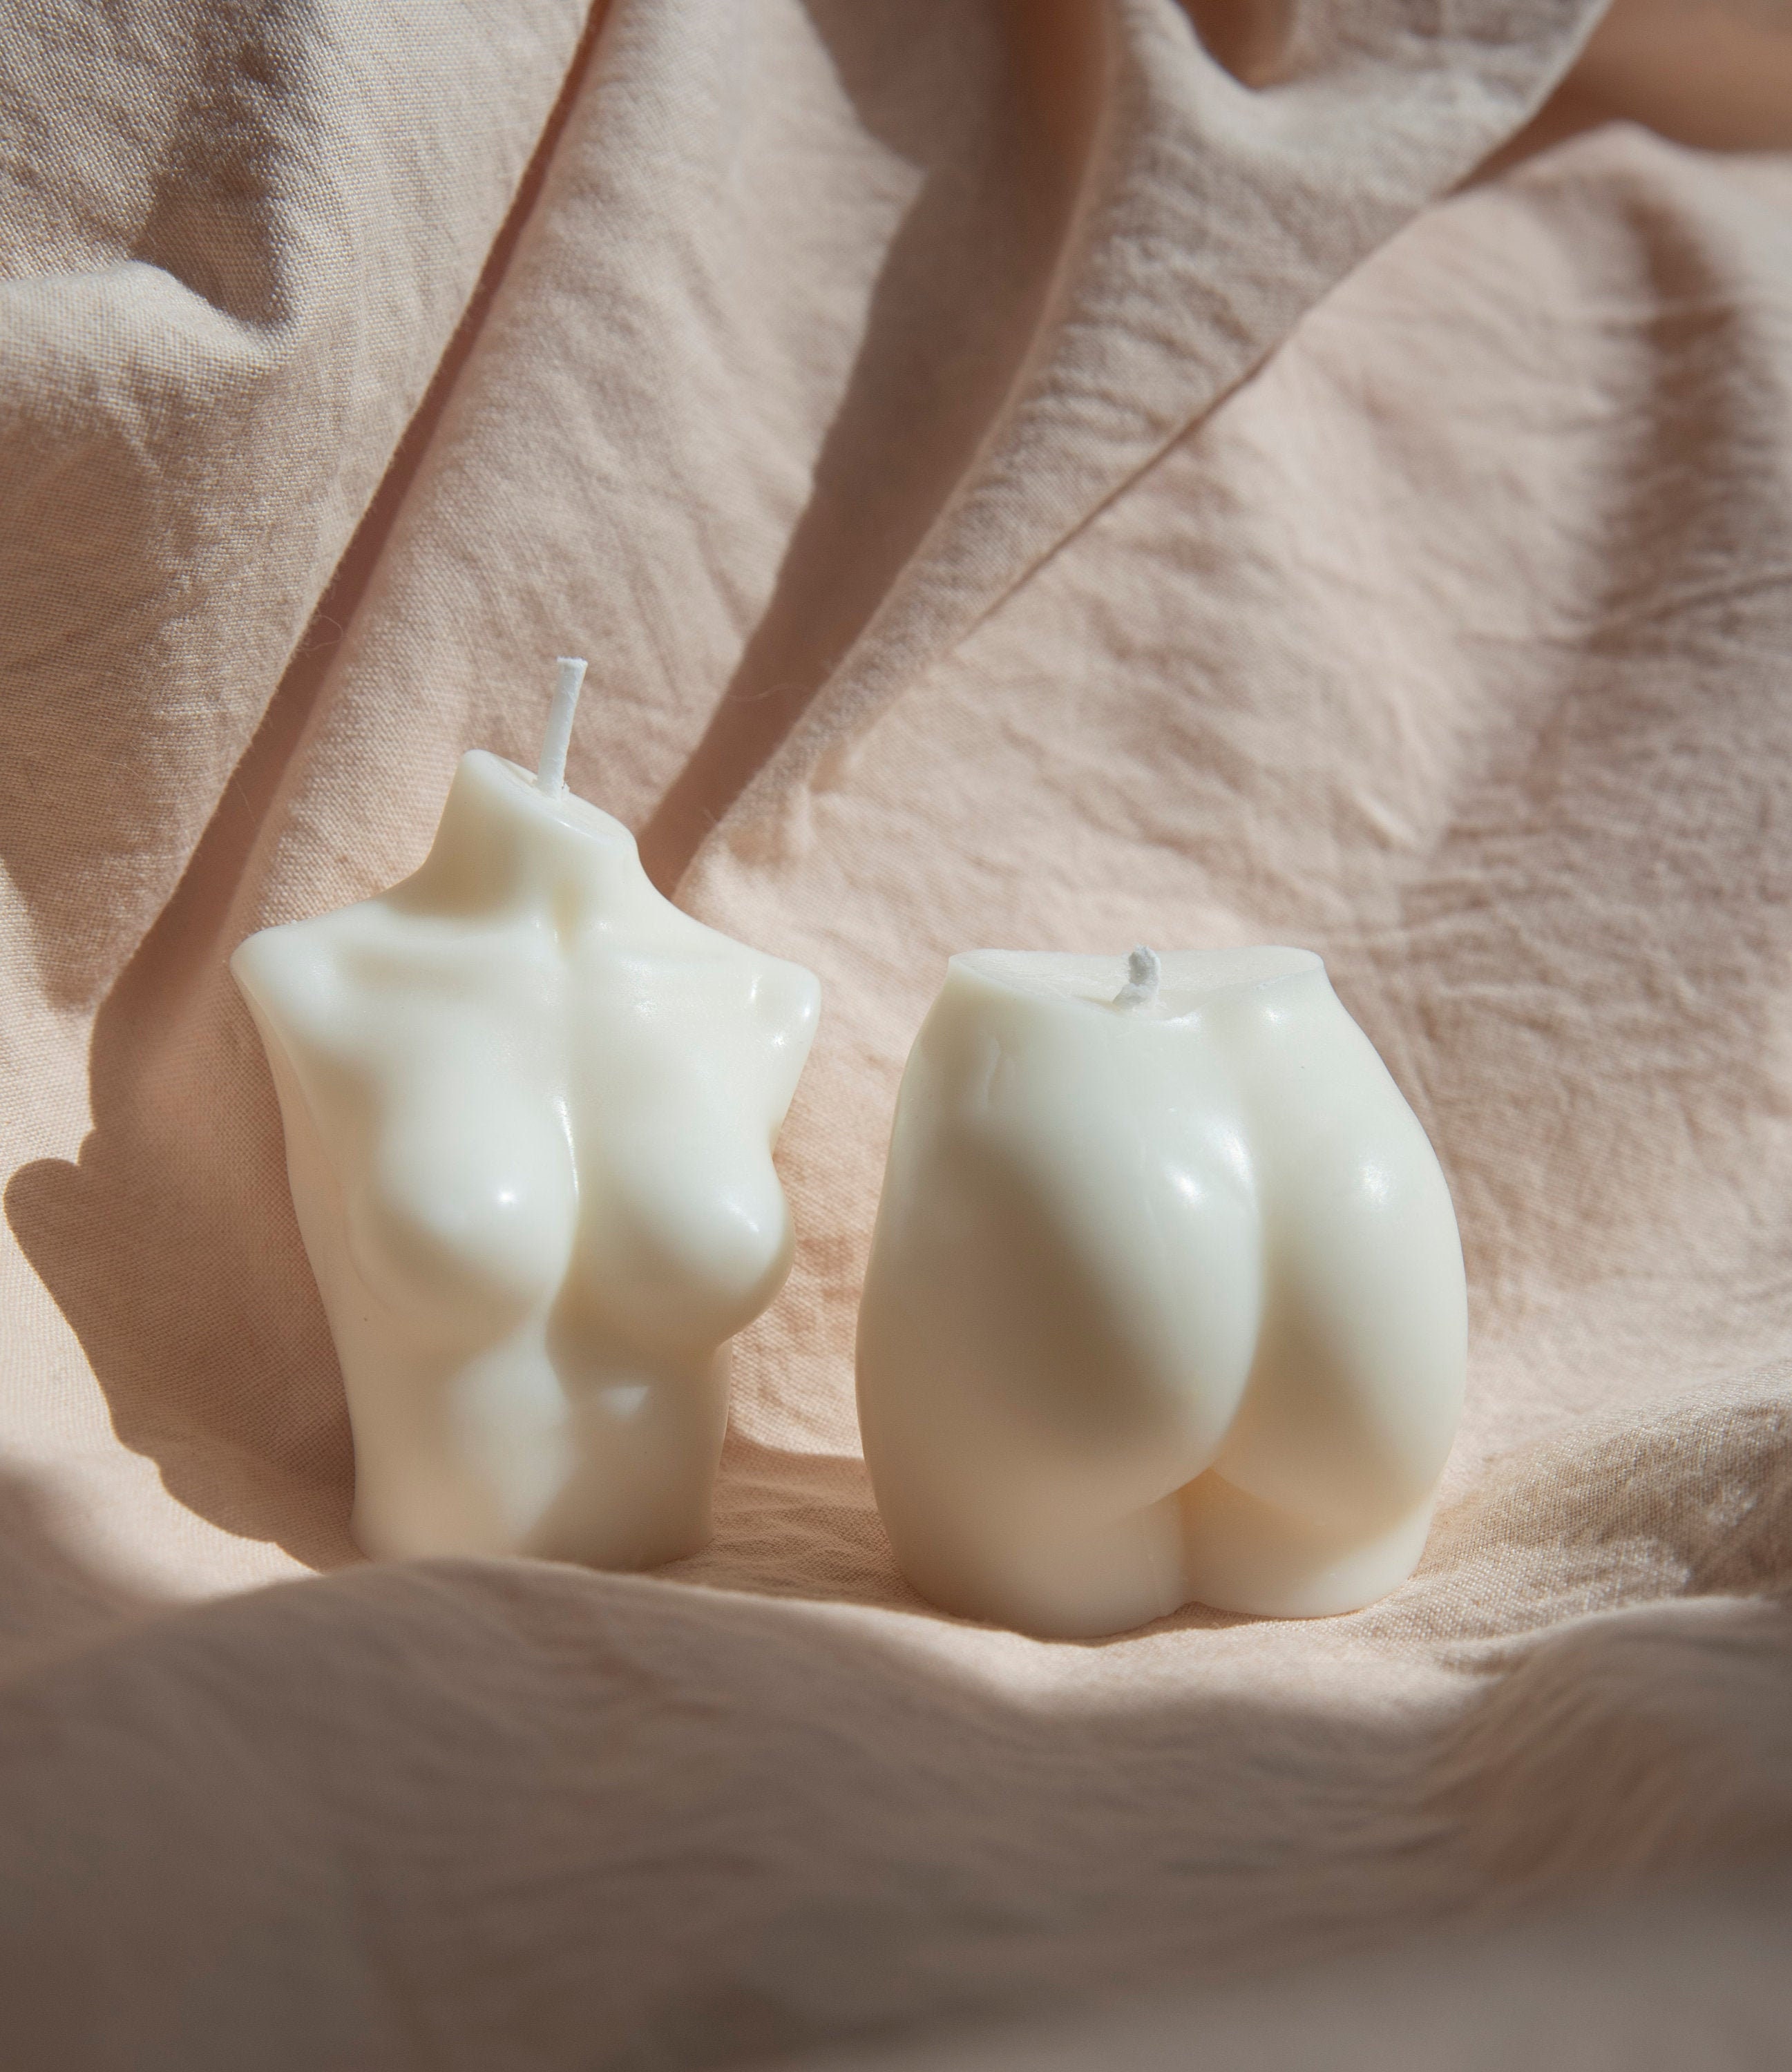 Handmade Bum Tealight Goddess Candle Back Boobs Sexy Shoulders Woman Breasts Candle Nude Women Waist Female Form Vase Wax